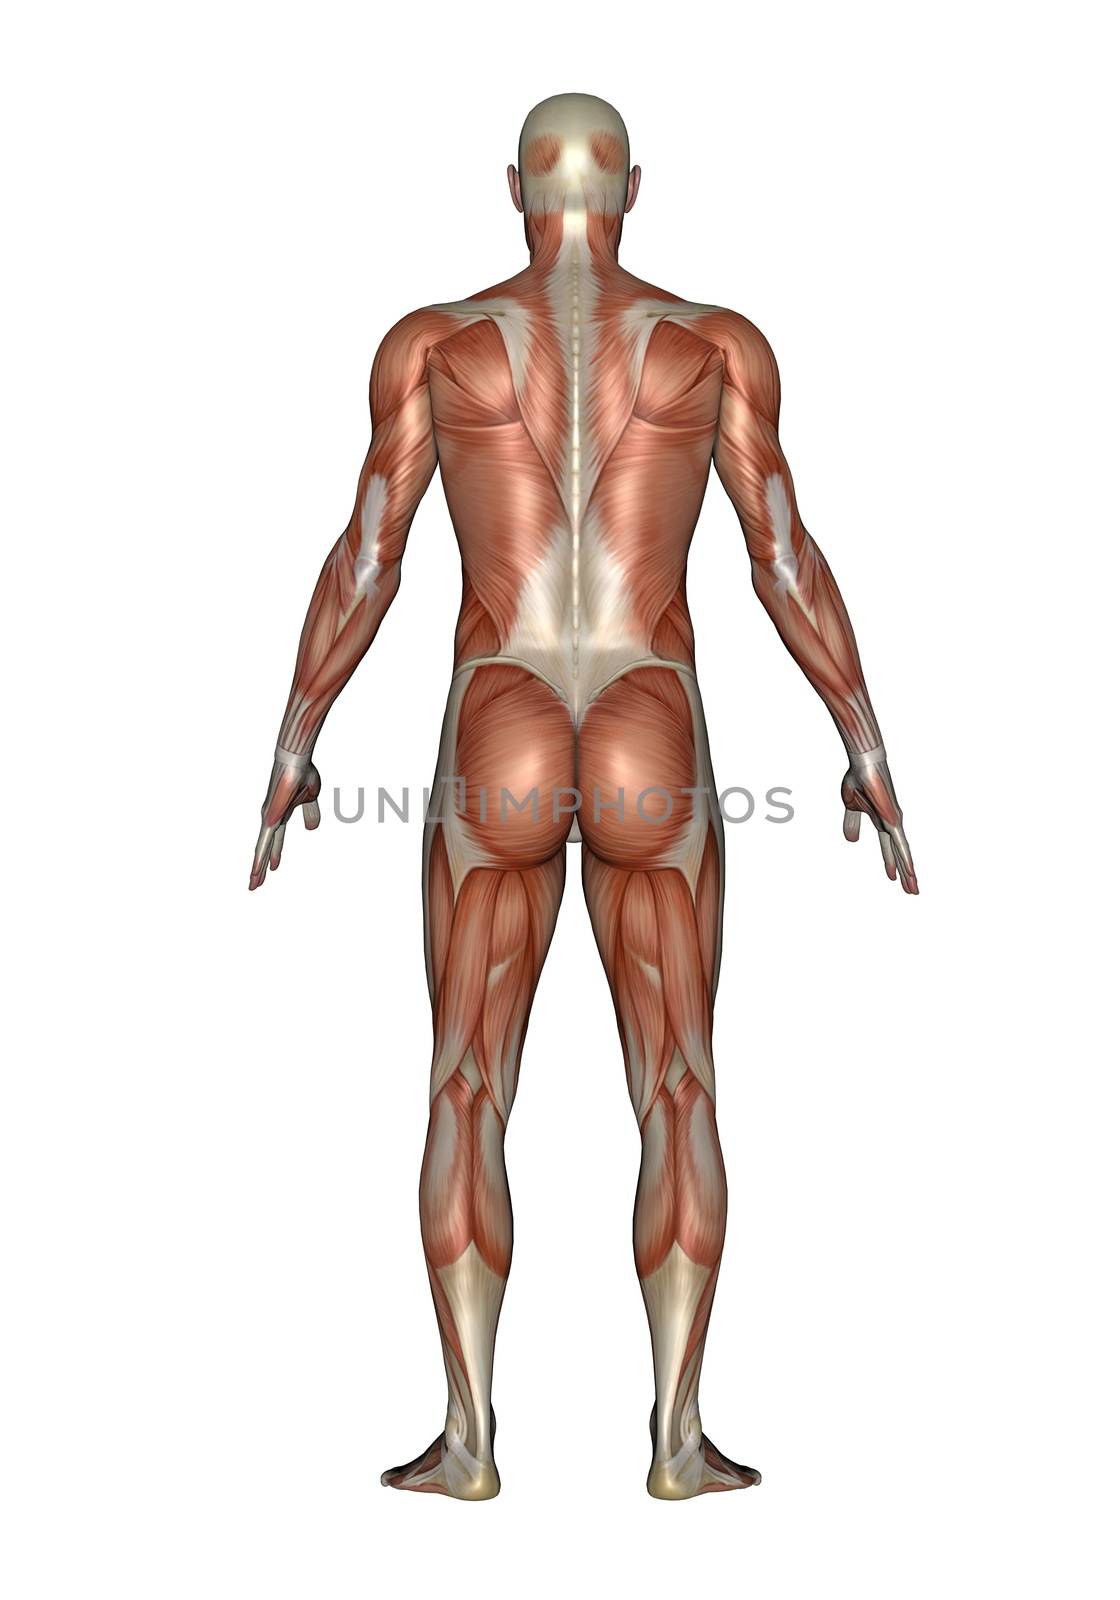 Back muscles of man - 3D render by Elenaphotos21